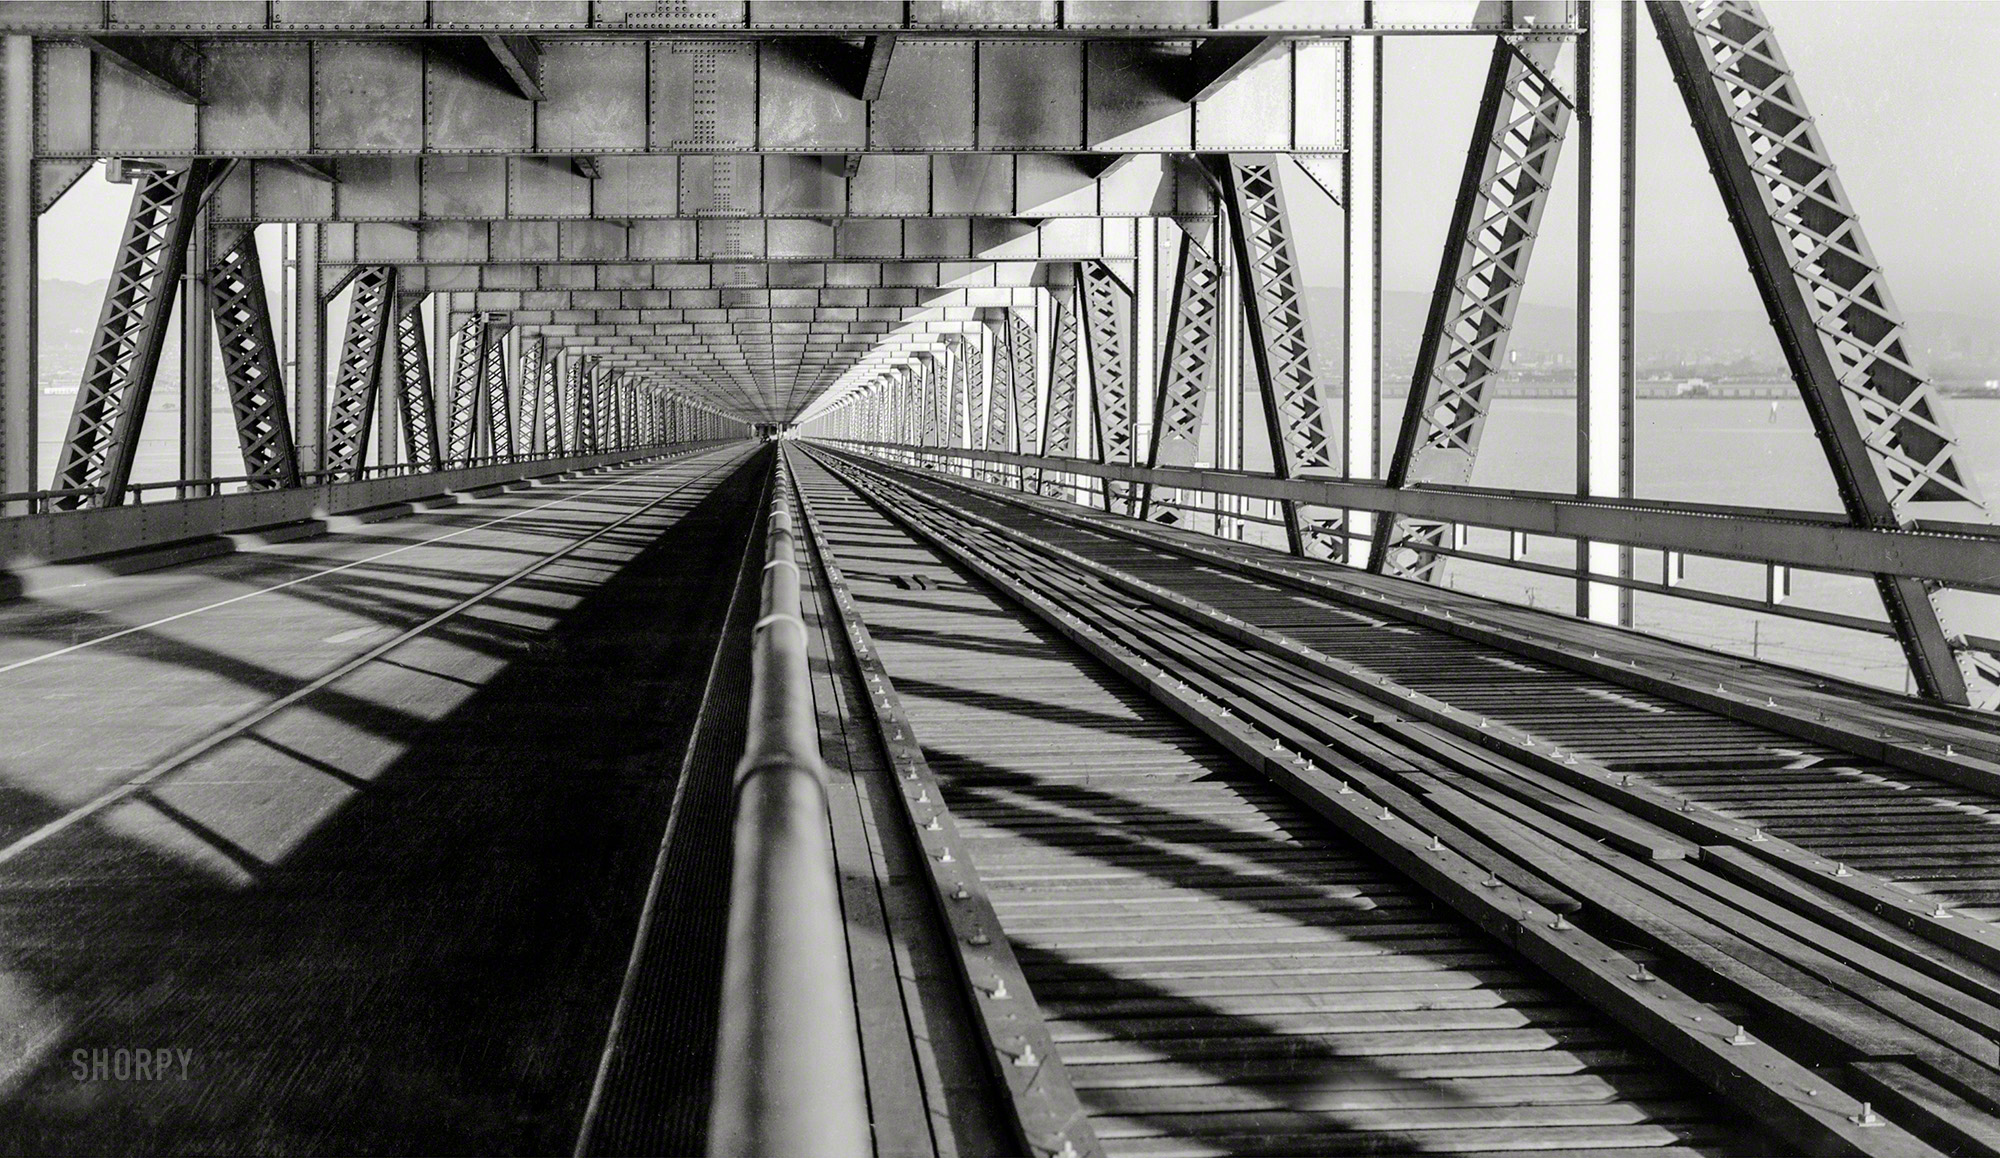 January 20, 1938. "San Francisco-Oakland Bay Bridge under construction. View of track and roadway, lower deck, East Bay. Caltrans, photographer." Historic American Buildings Survey, Library of Congress. View full size.